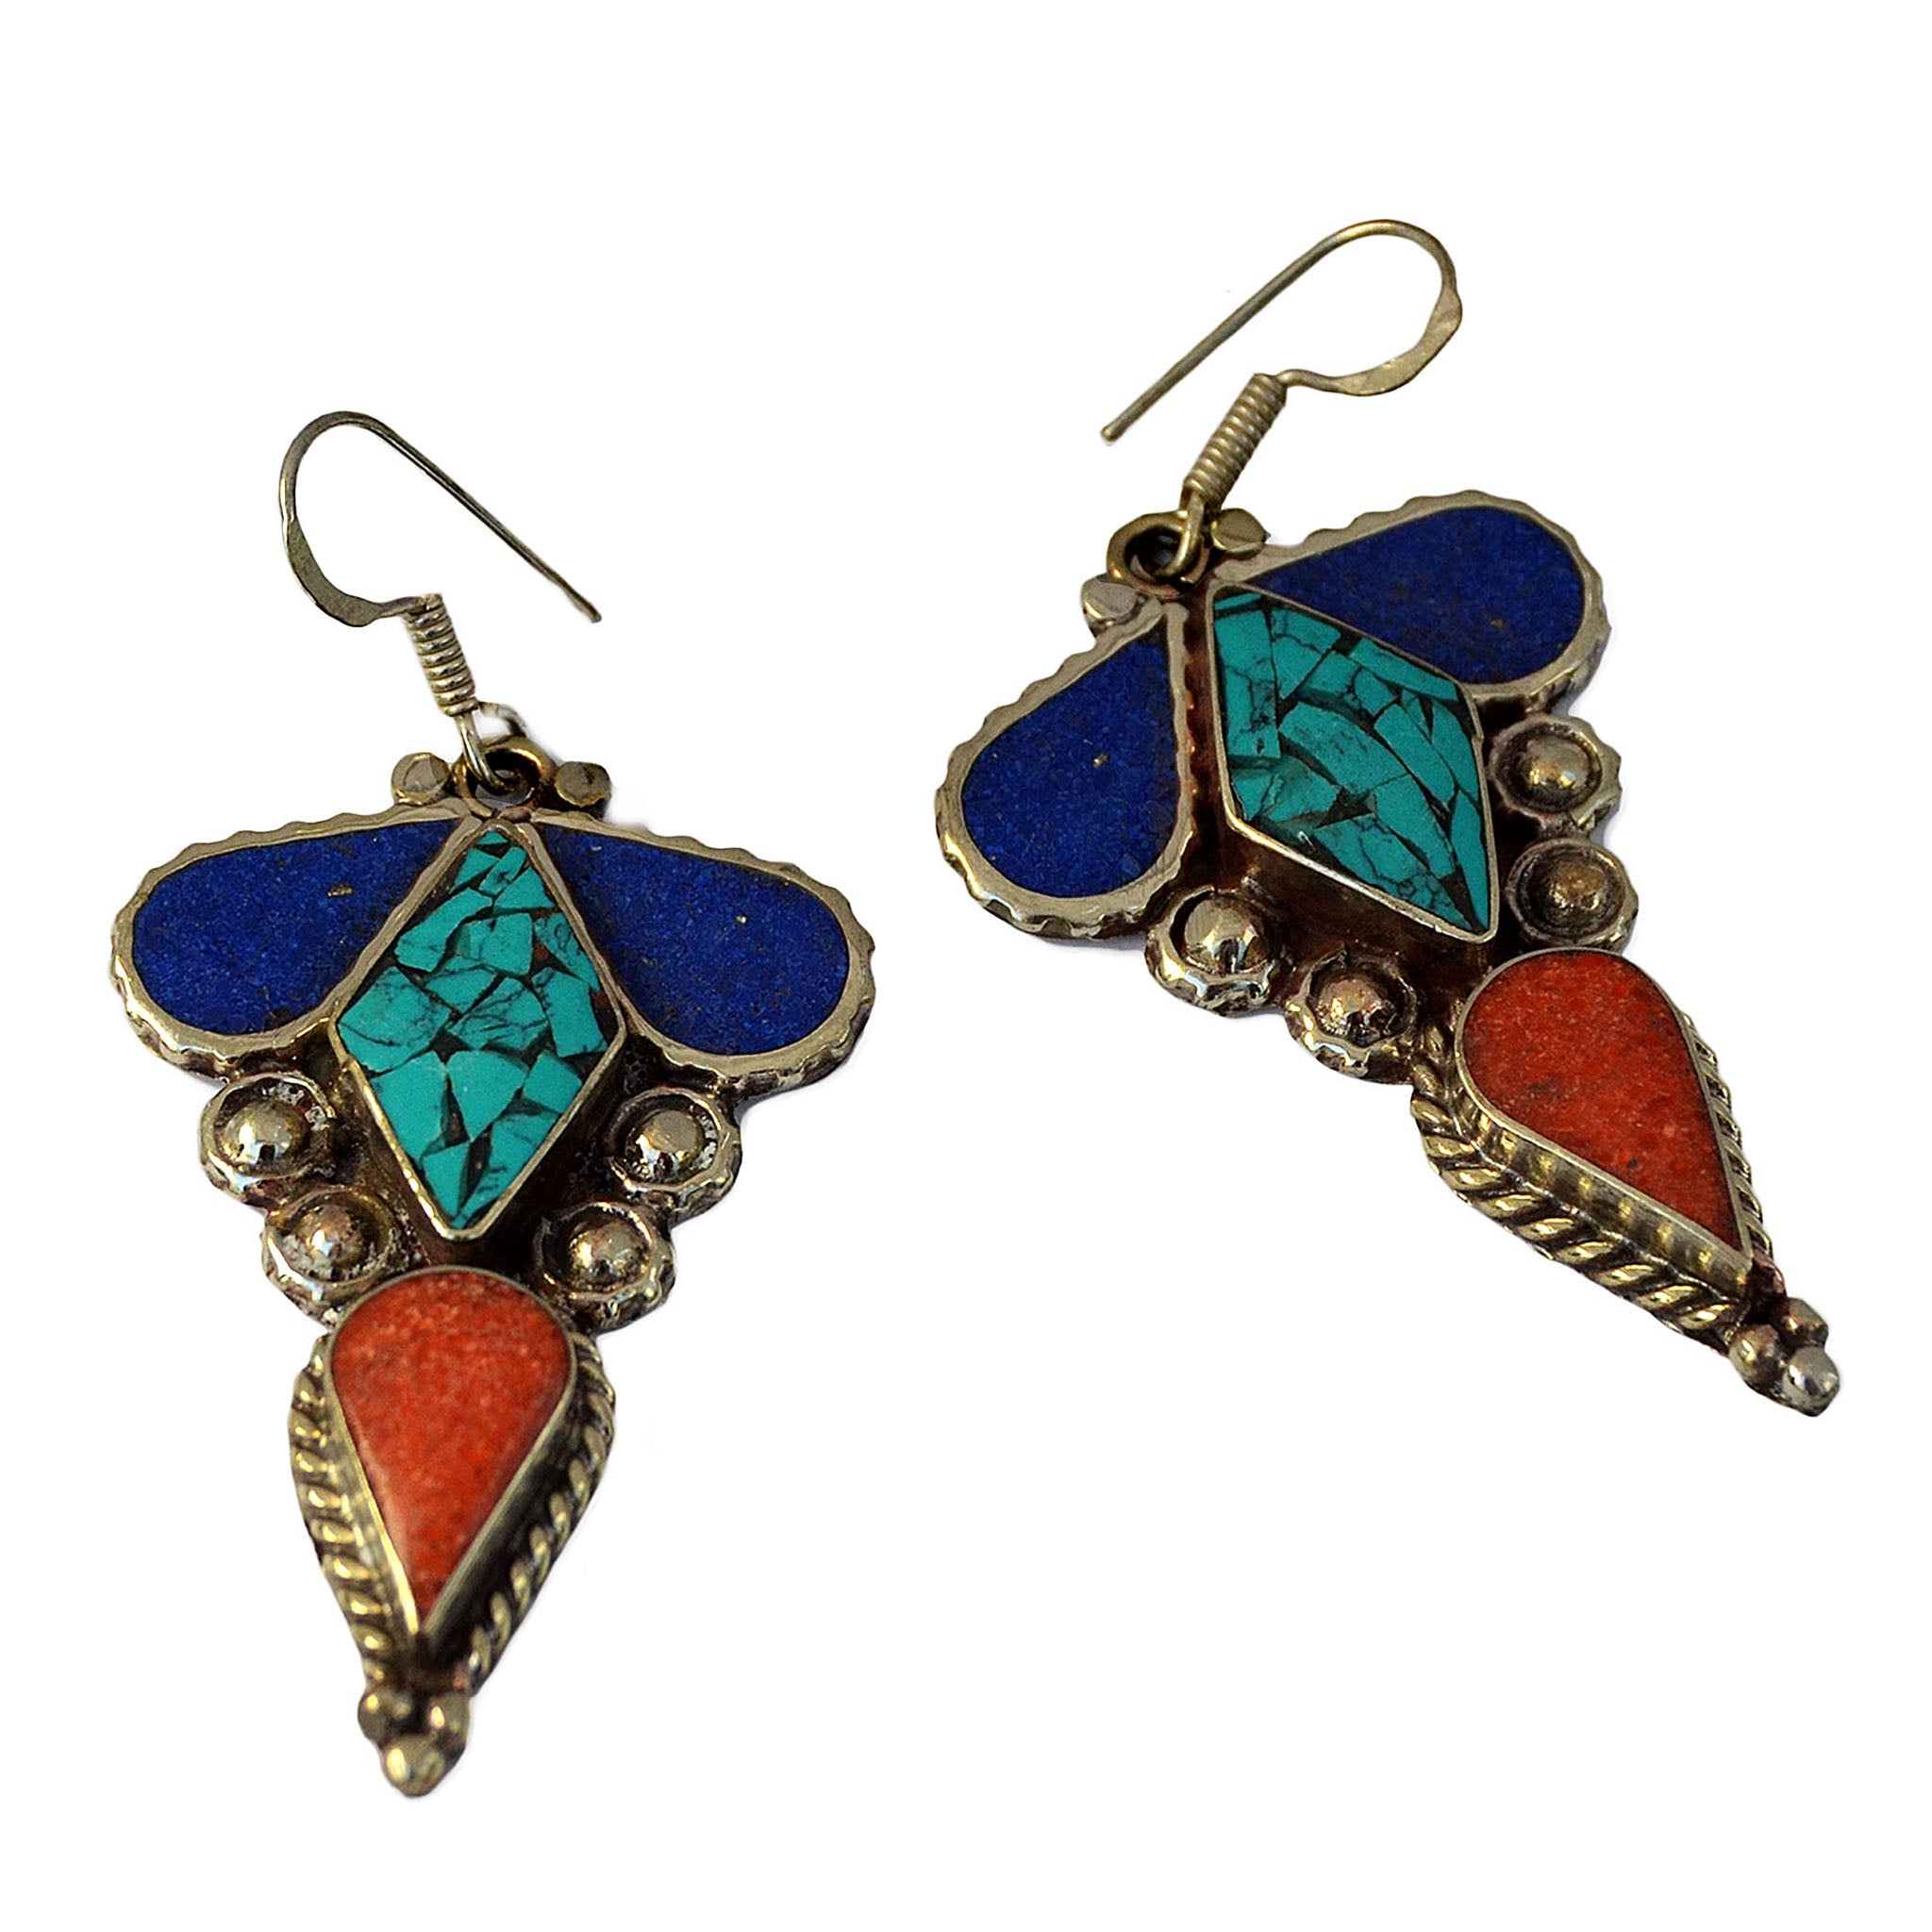 Ethnic silver dangle earrings with inlay turquoise, lapis lazuli and red coral gemstones